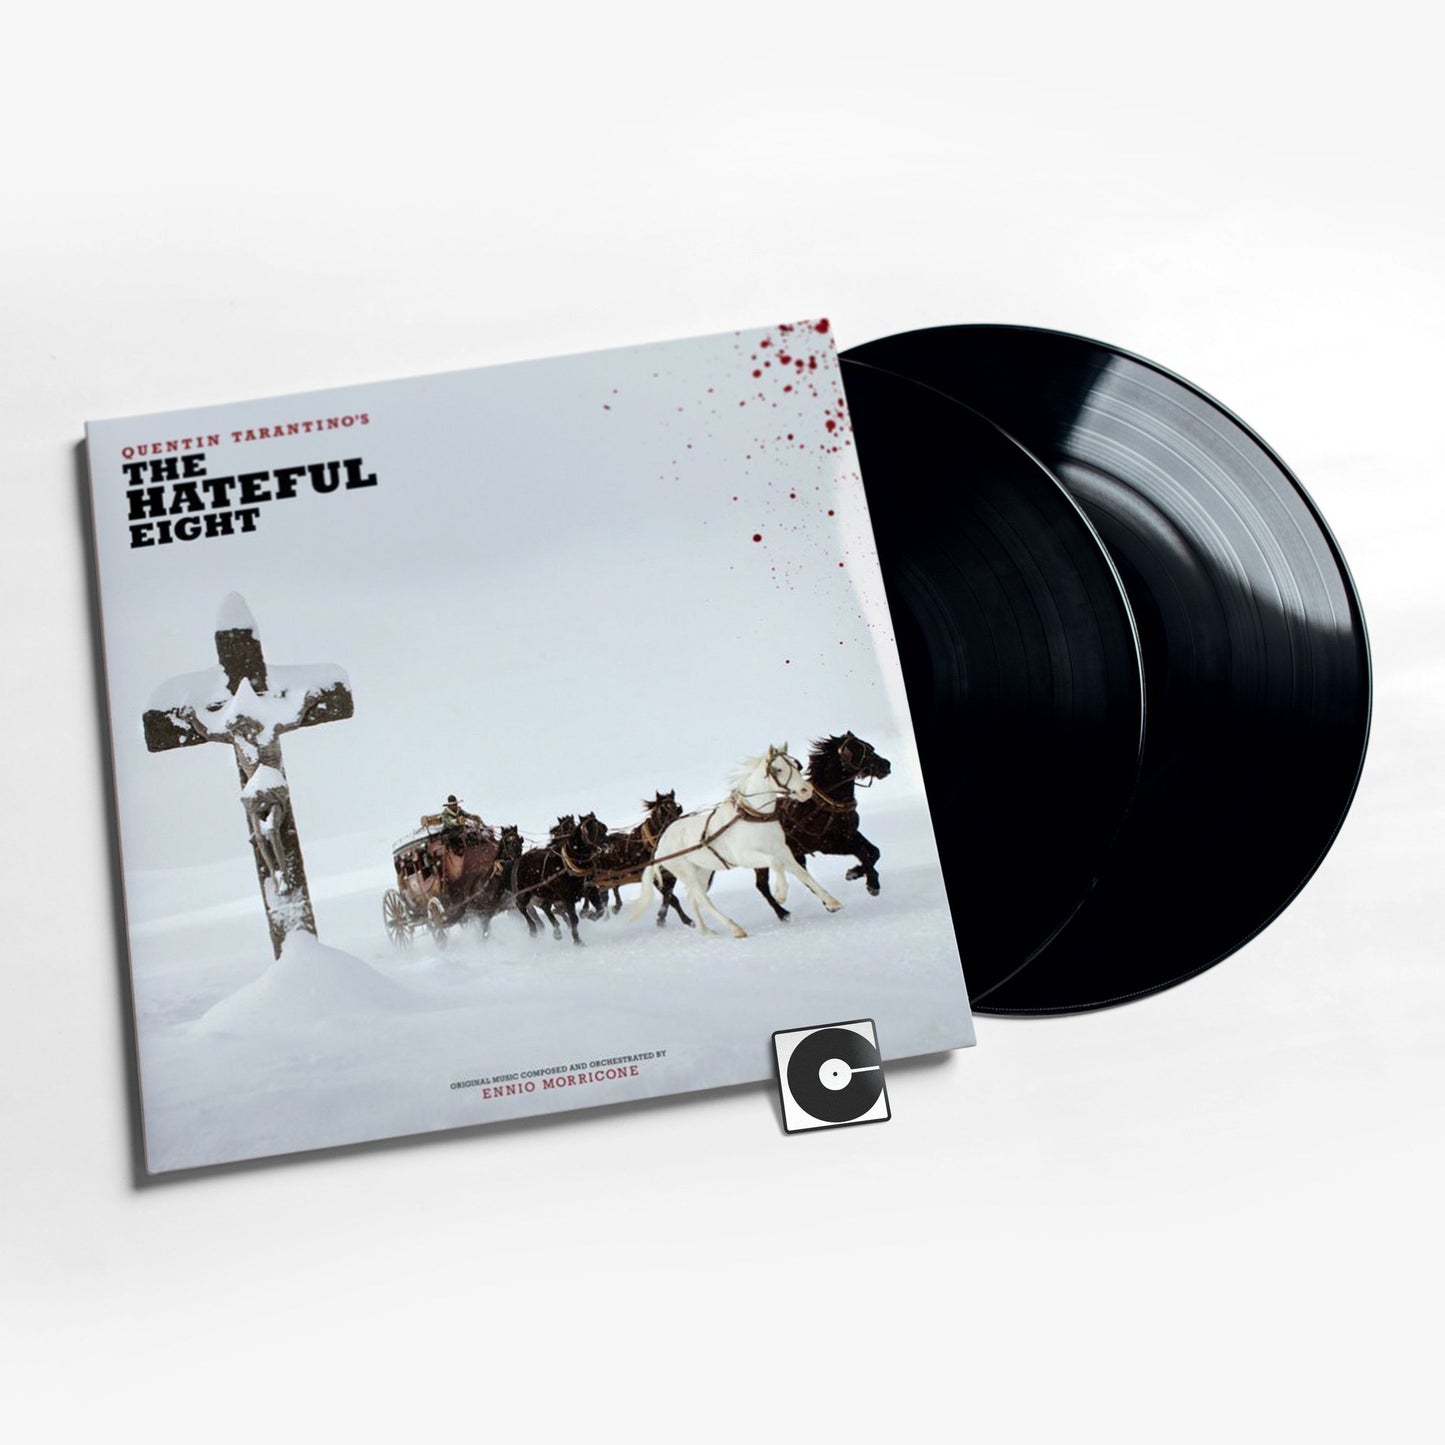 The Hateful Eight - "Original Motion Picture Soundtrack"